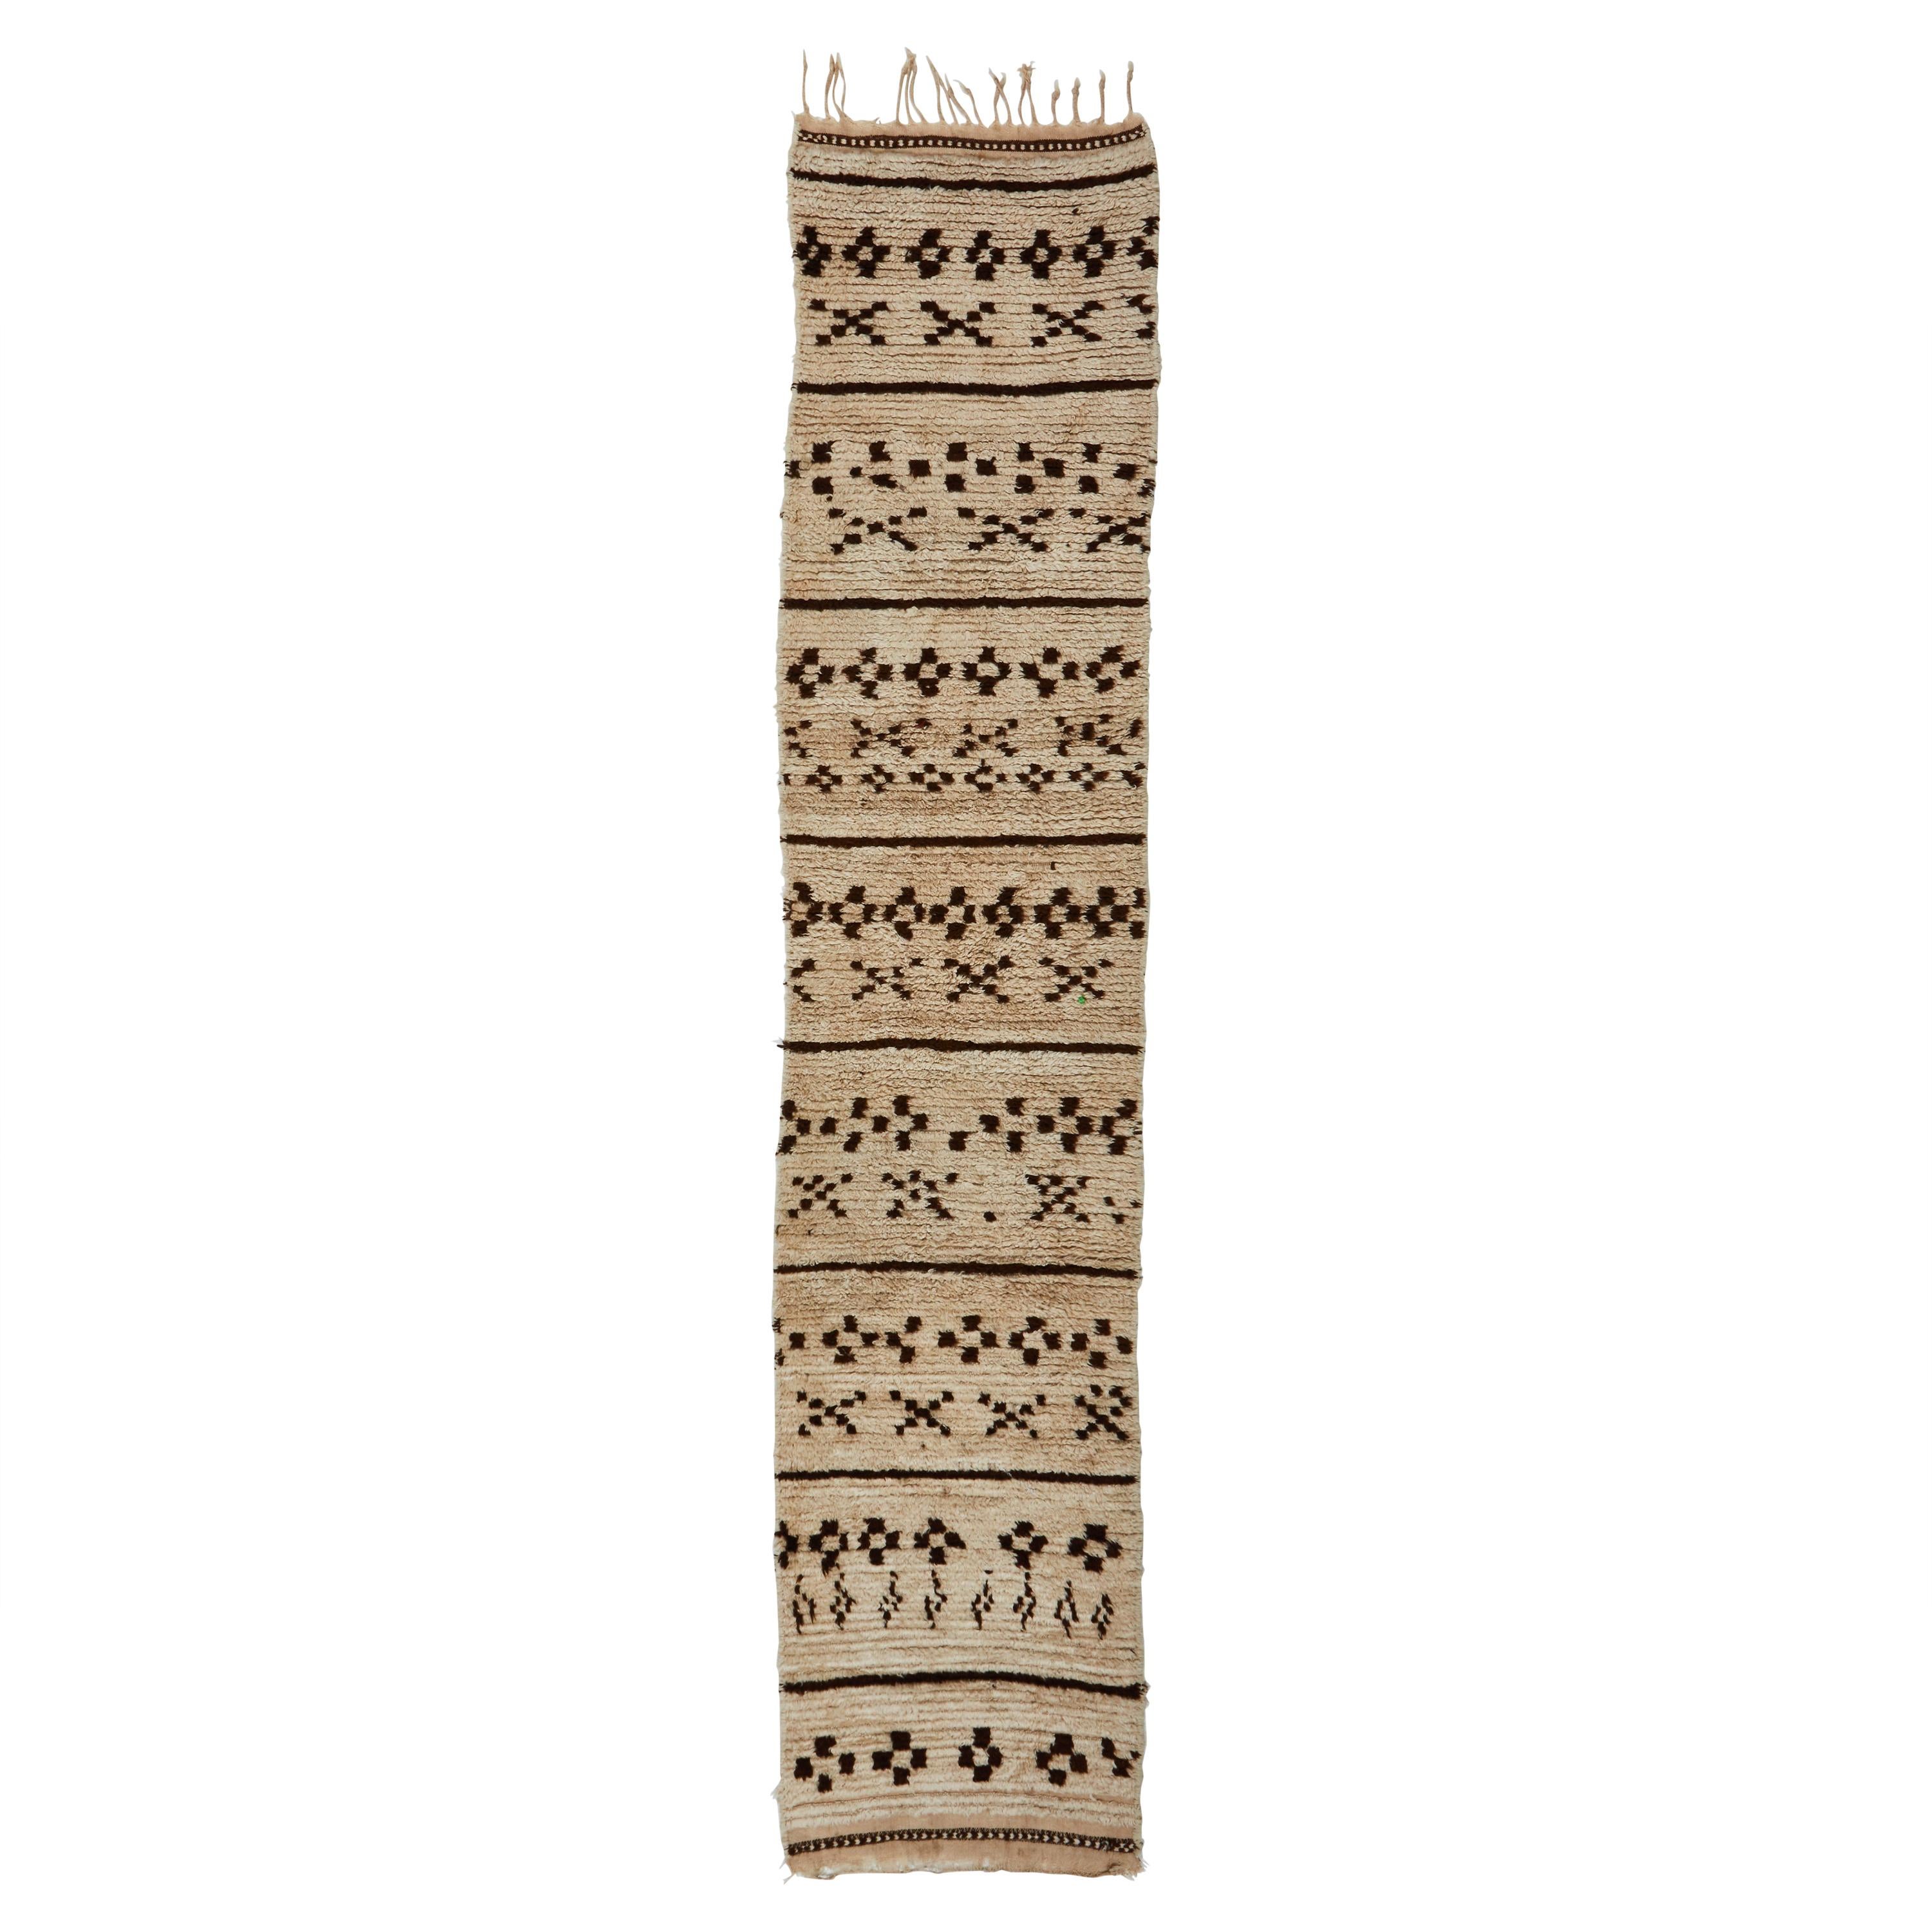 Moroccan Hand Knotted Brown and Tan Beni Ourain Wool Runner, circa 1940